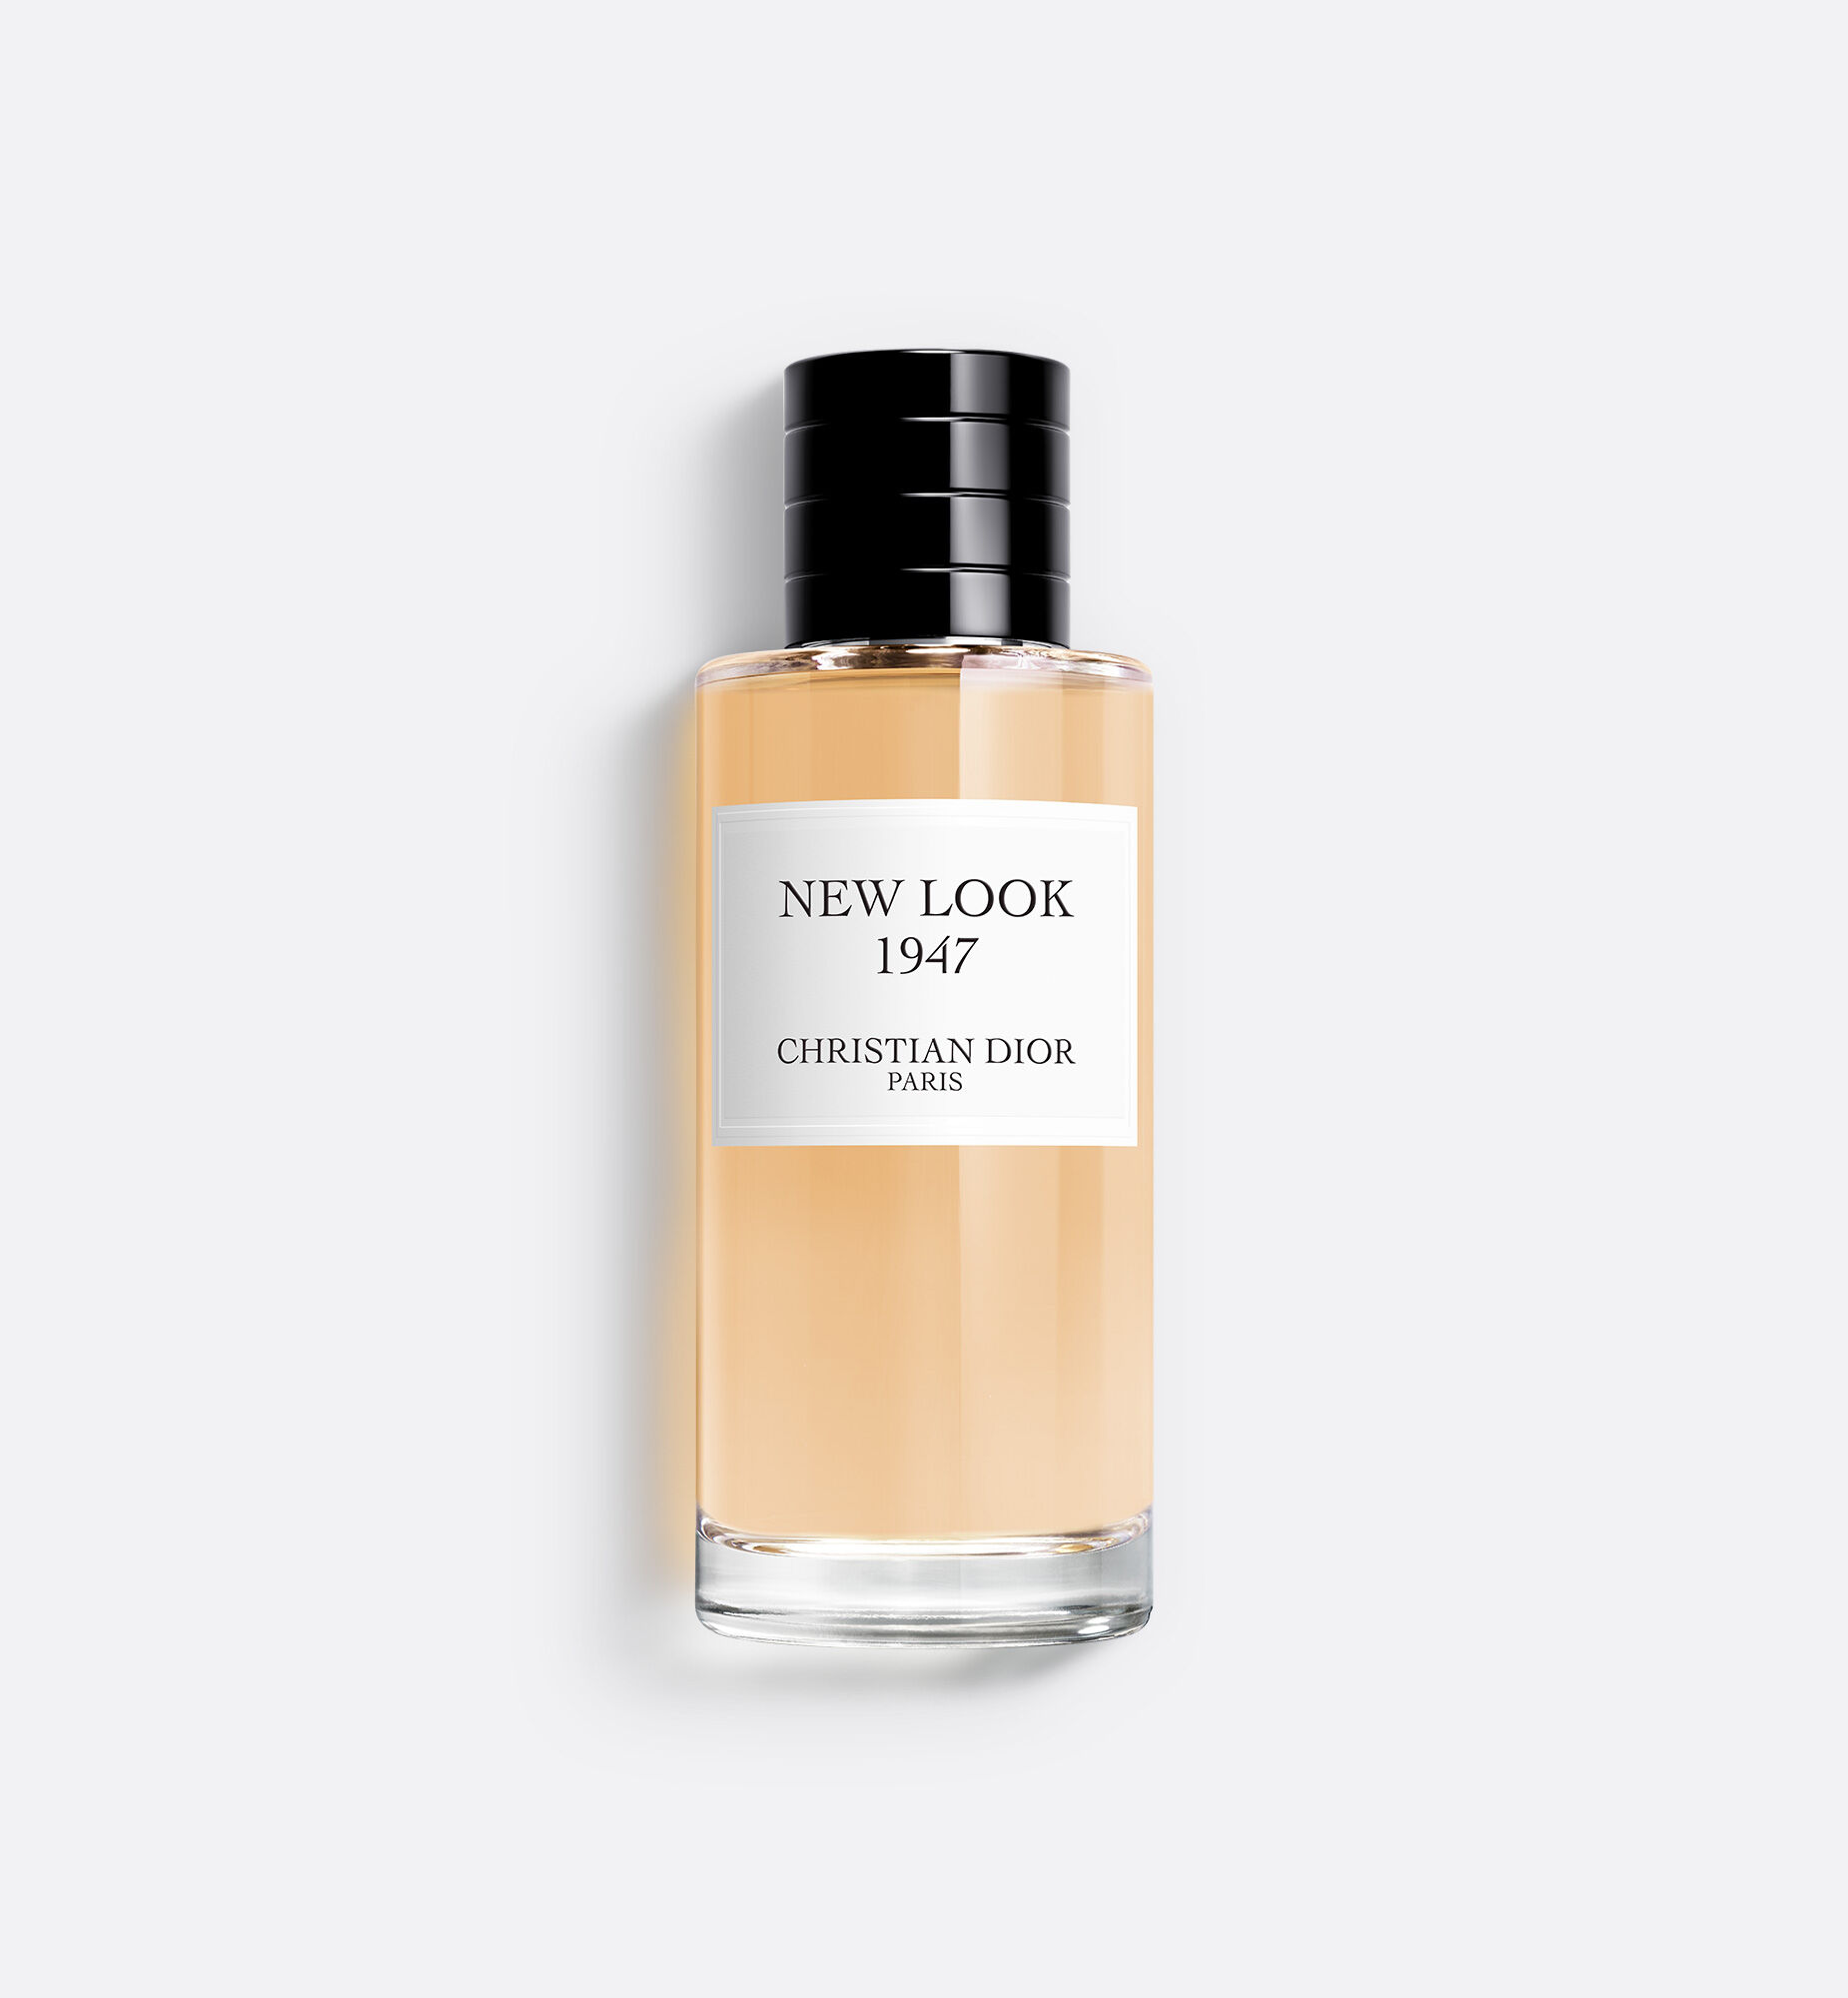 New Look 1947 Fragrance: An Echo of the Birth of Dior Couture | DIOR